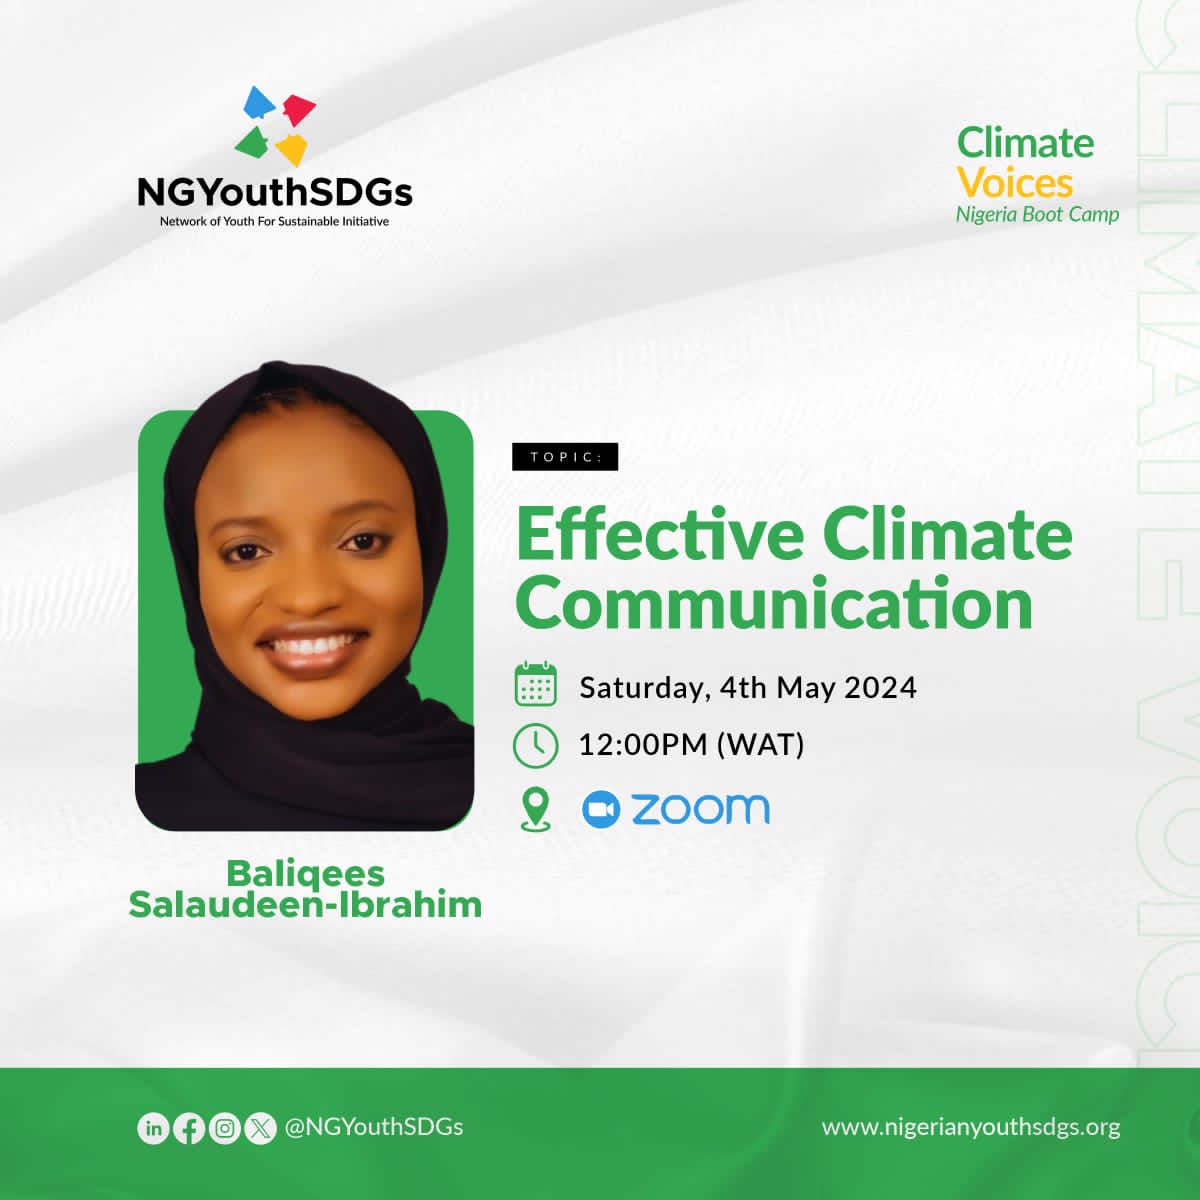 Youths are the biggest drivers of change, Paul Eweola highlight importance of youth in climate change in another sessions of CVN bootcamp while Baliqees Salaudeen drove us through effective climate communication. Both speakers were amazing and resourceful. #ClimateVoicesNG